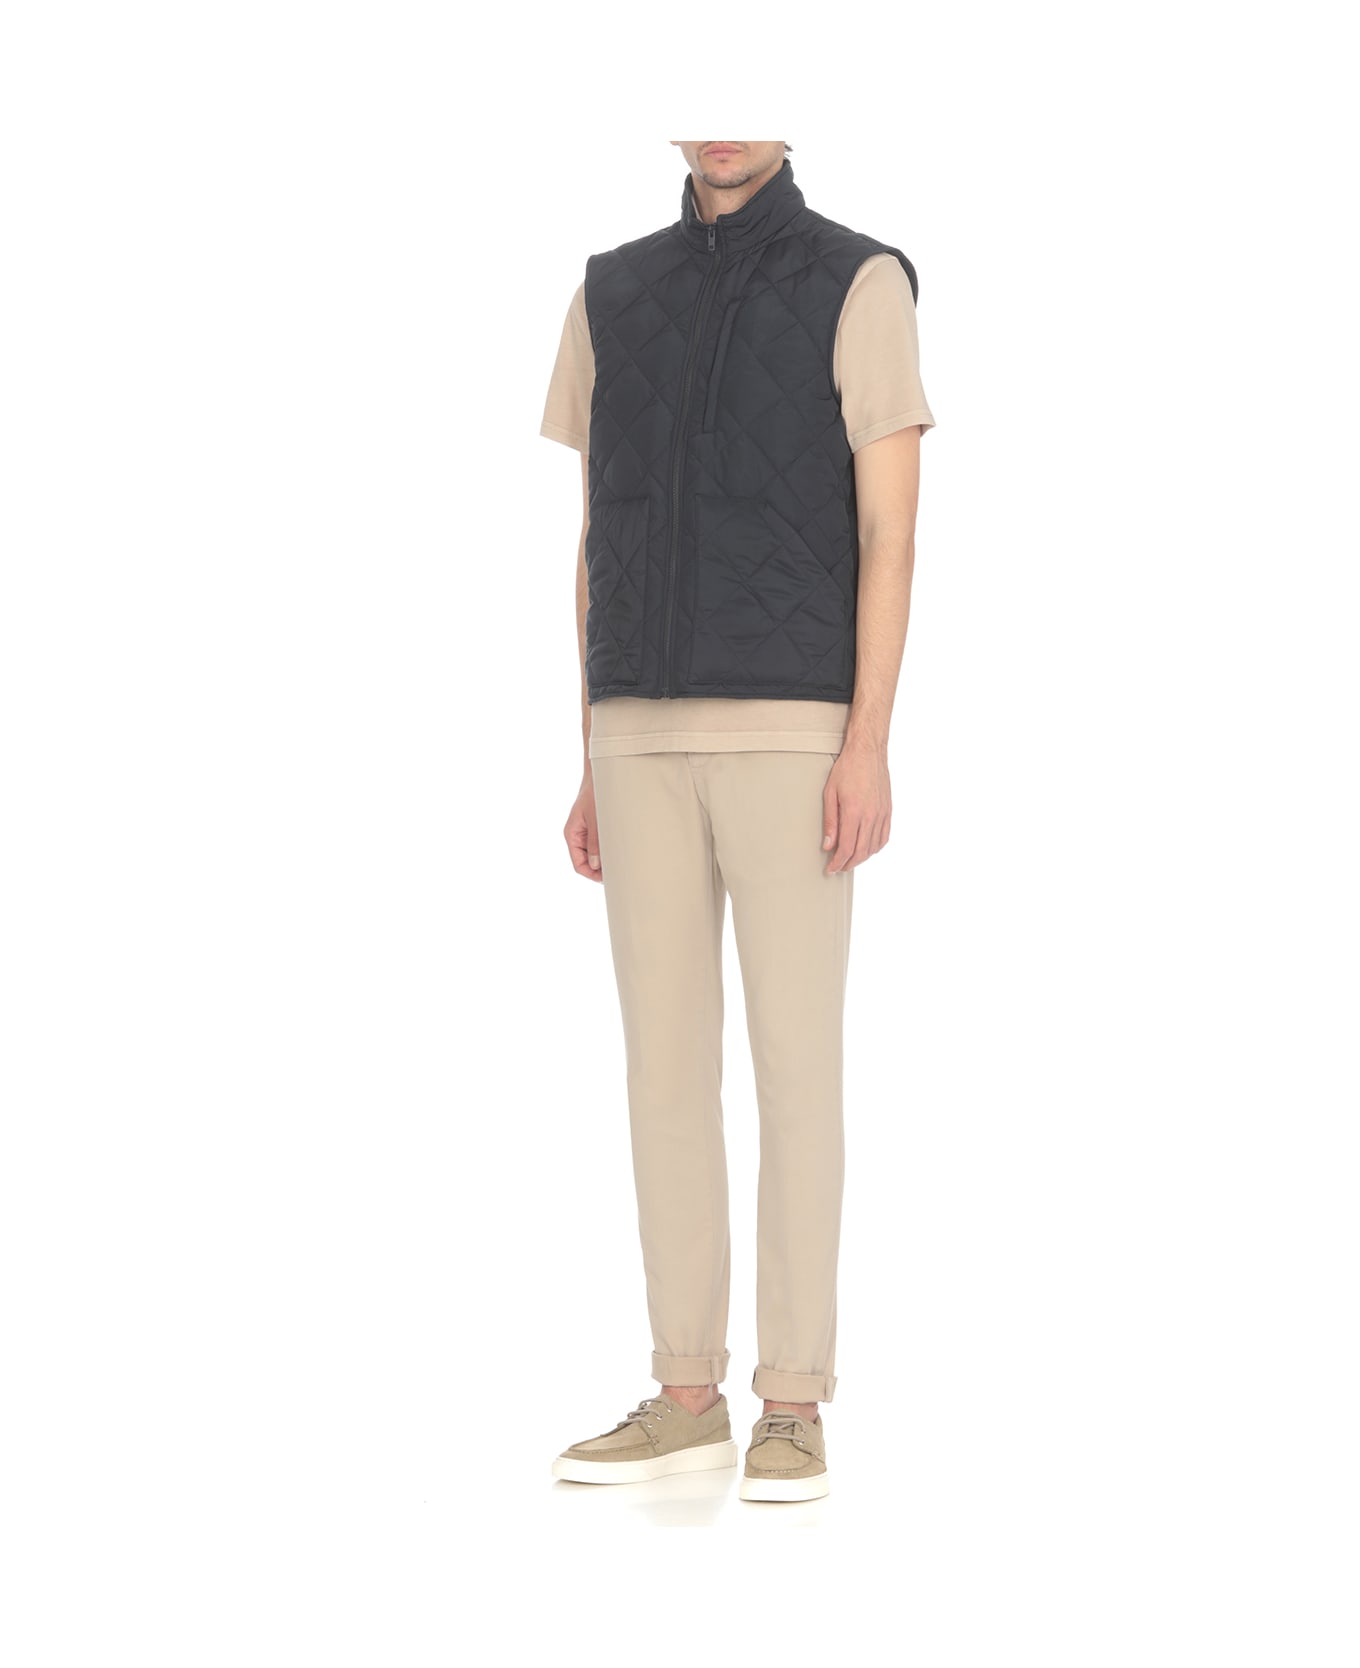 Fay Quilted Vest With Pockets - Blue